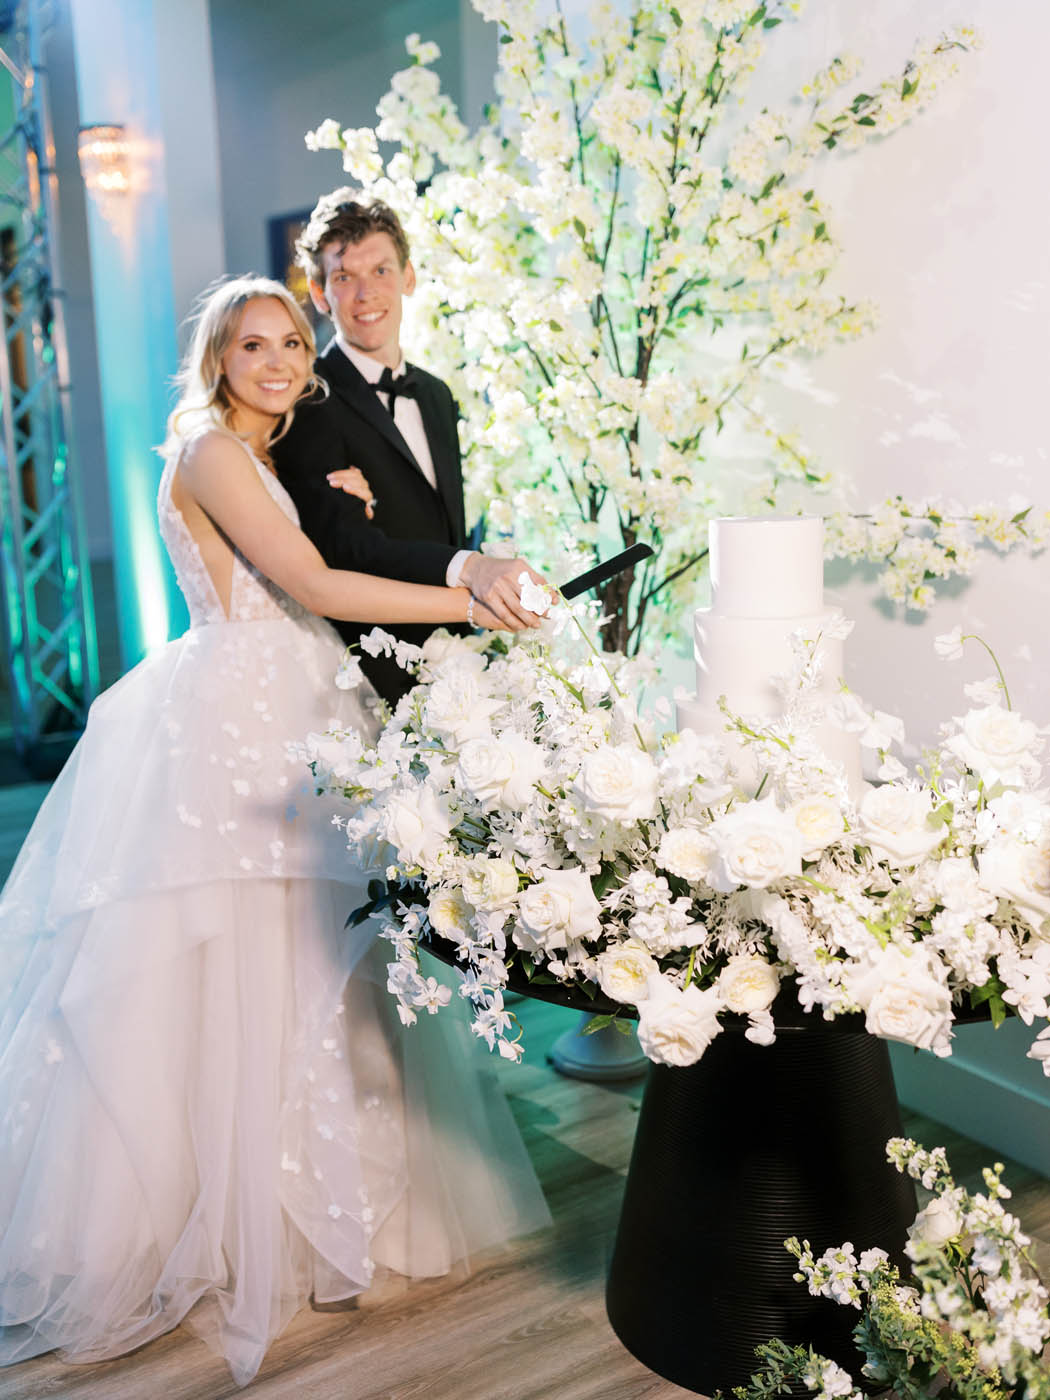 the bride and groom cut their modern white cake surrounded by colorful lighting